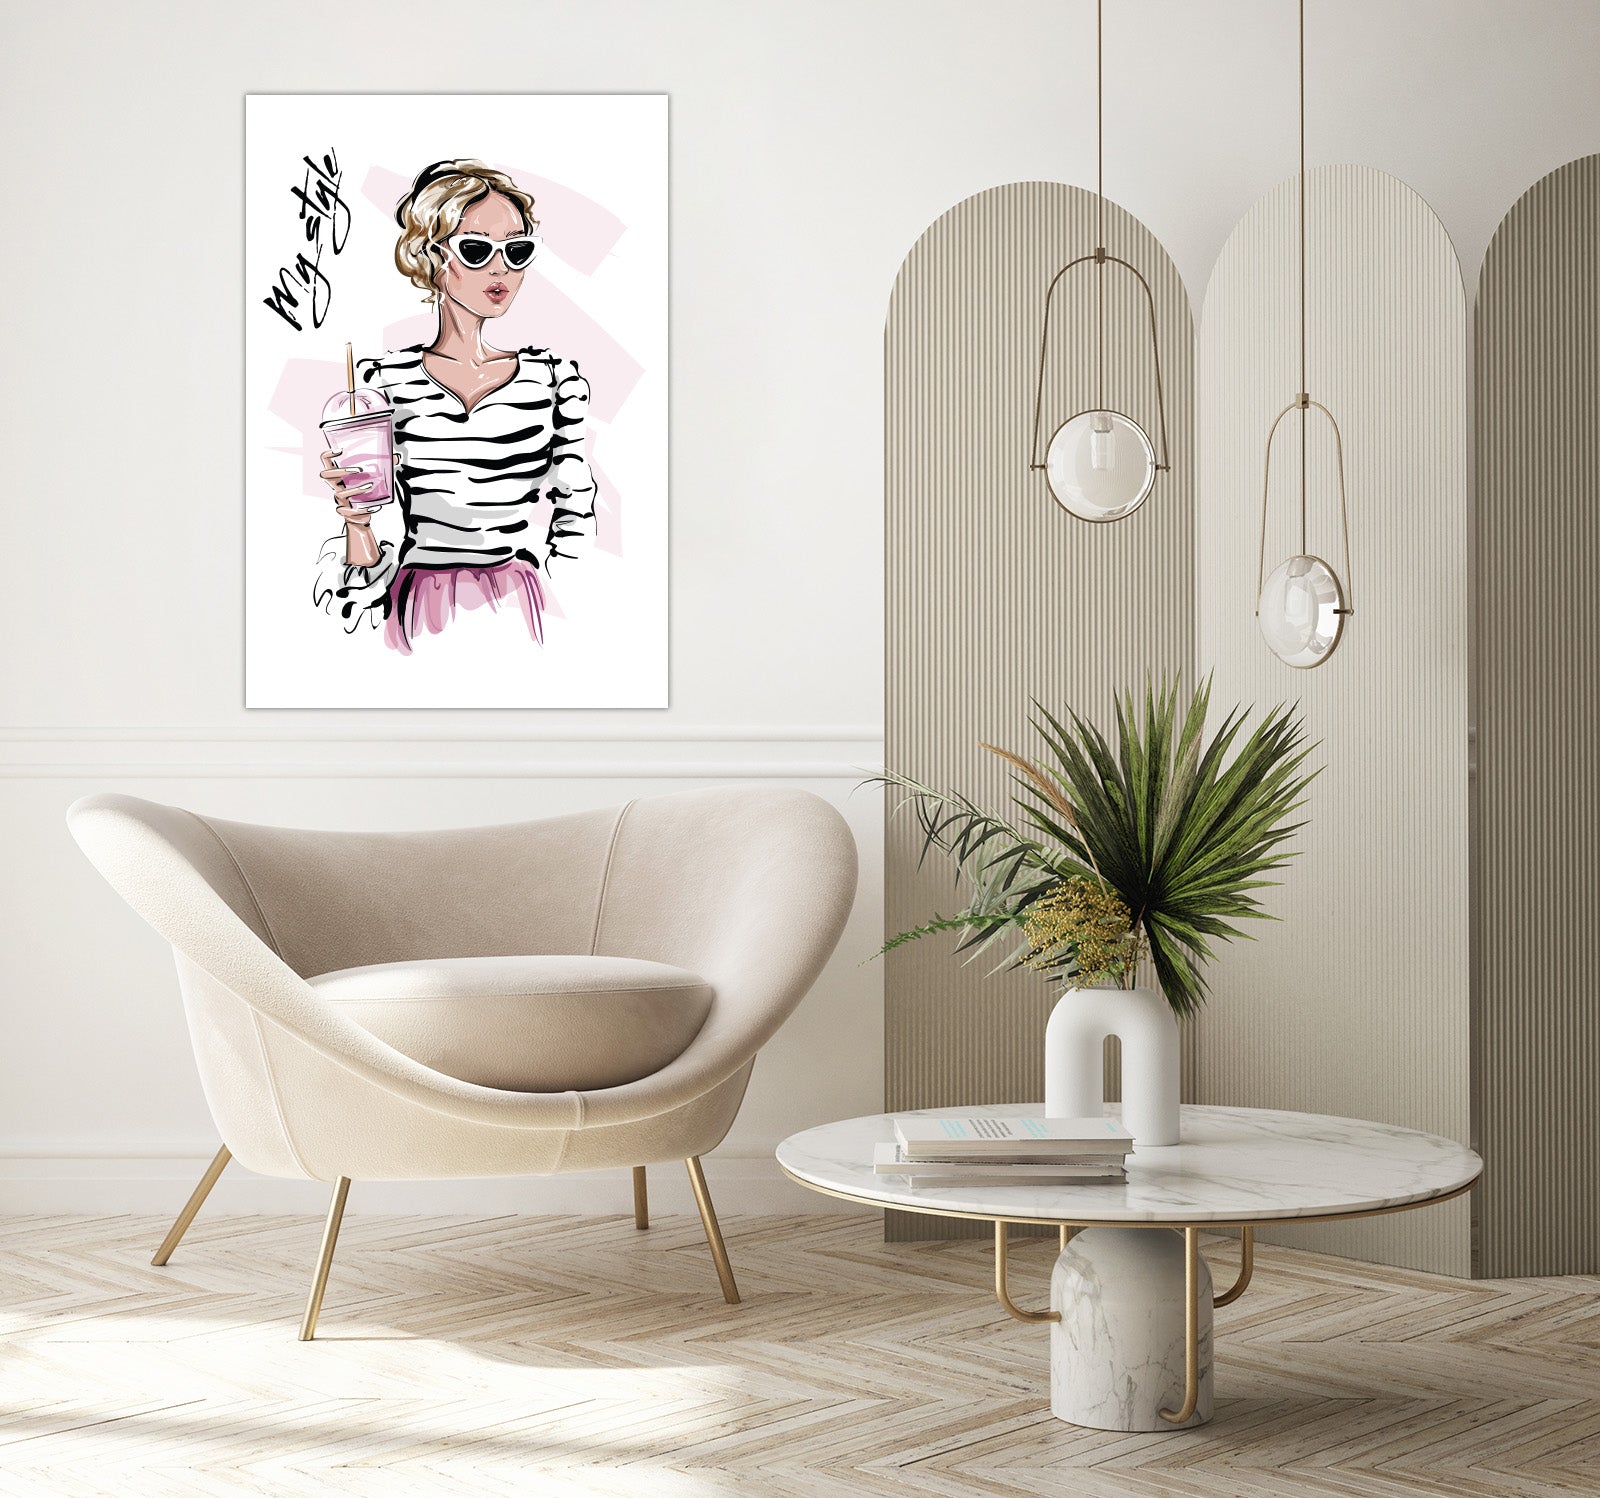 Wall Art for Living Room (a Girl Wearing a Shirt and Sunglasses)